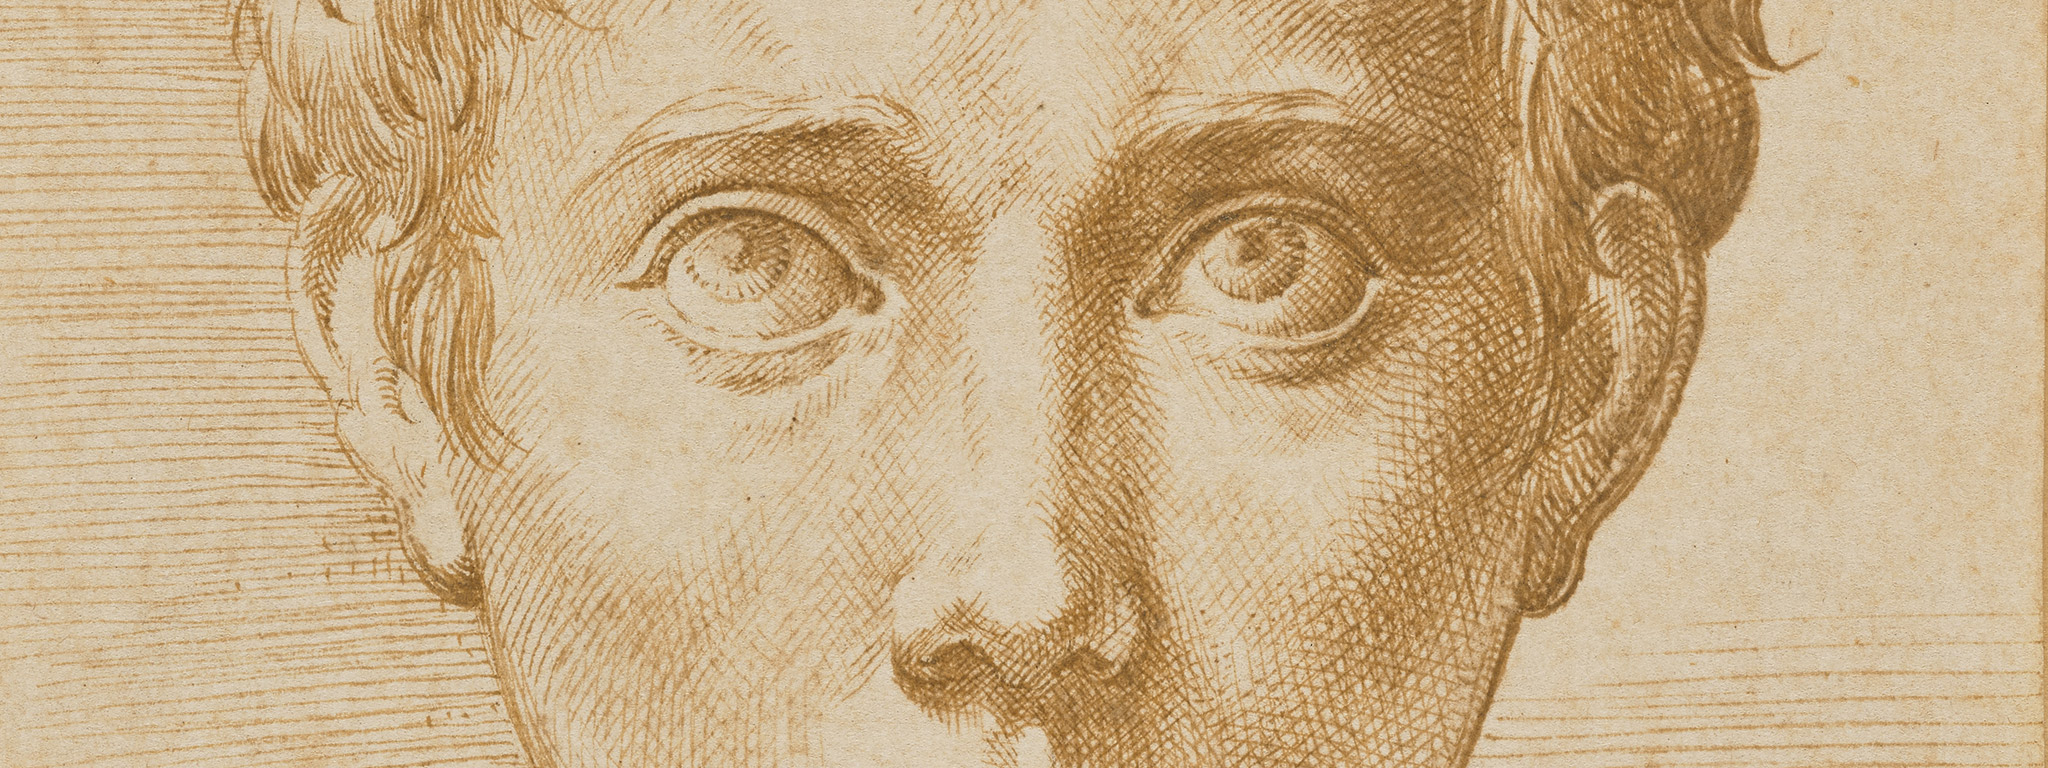 Head of a Young Man (detail), about 1539-1540, Parmigianino, pen and brown ink. The J. Paul Getty Museum